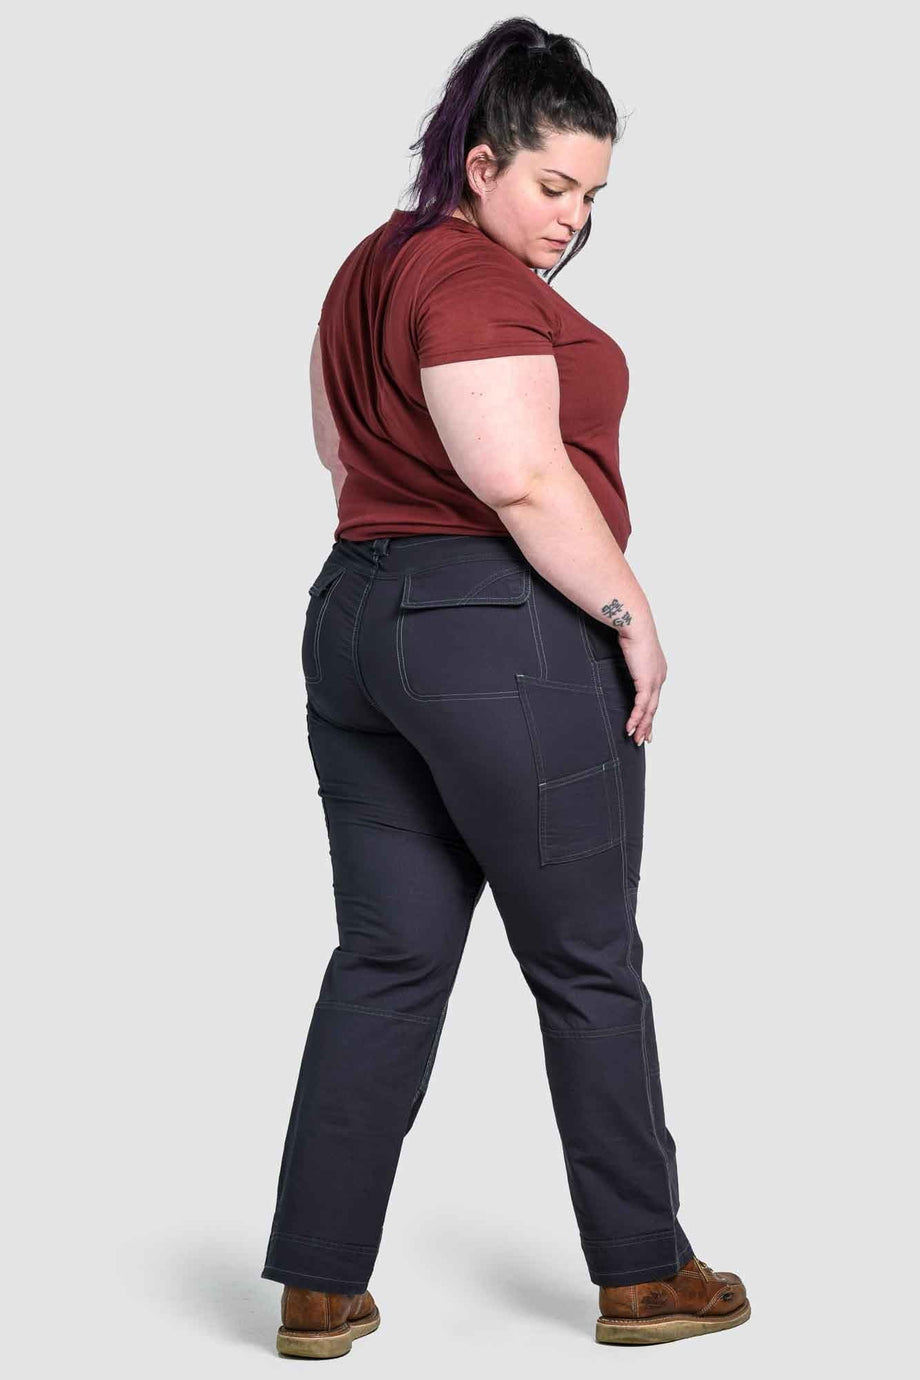 Stretch Work Pants for Women Womens Thermal Leggings Polyester Yoga Pants  Leggings with Pockets for Women Plus Size – – Yaxa Costa Rica